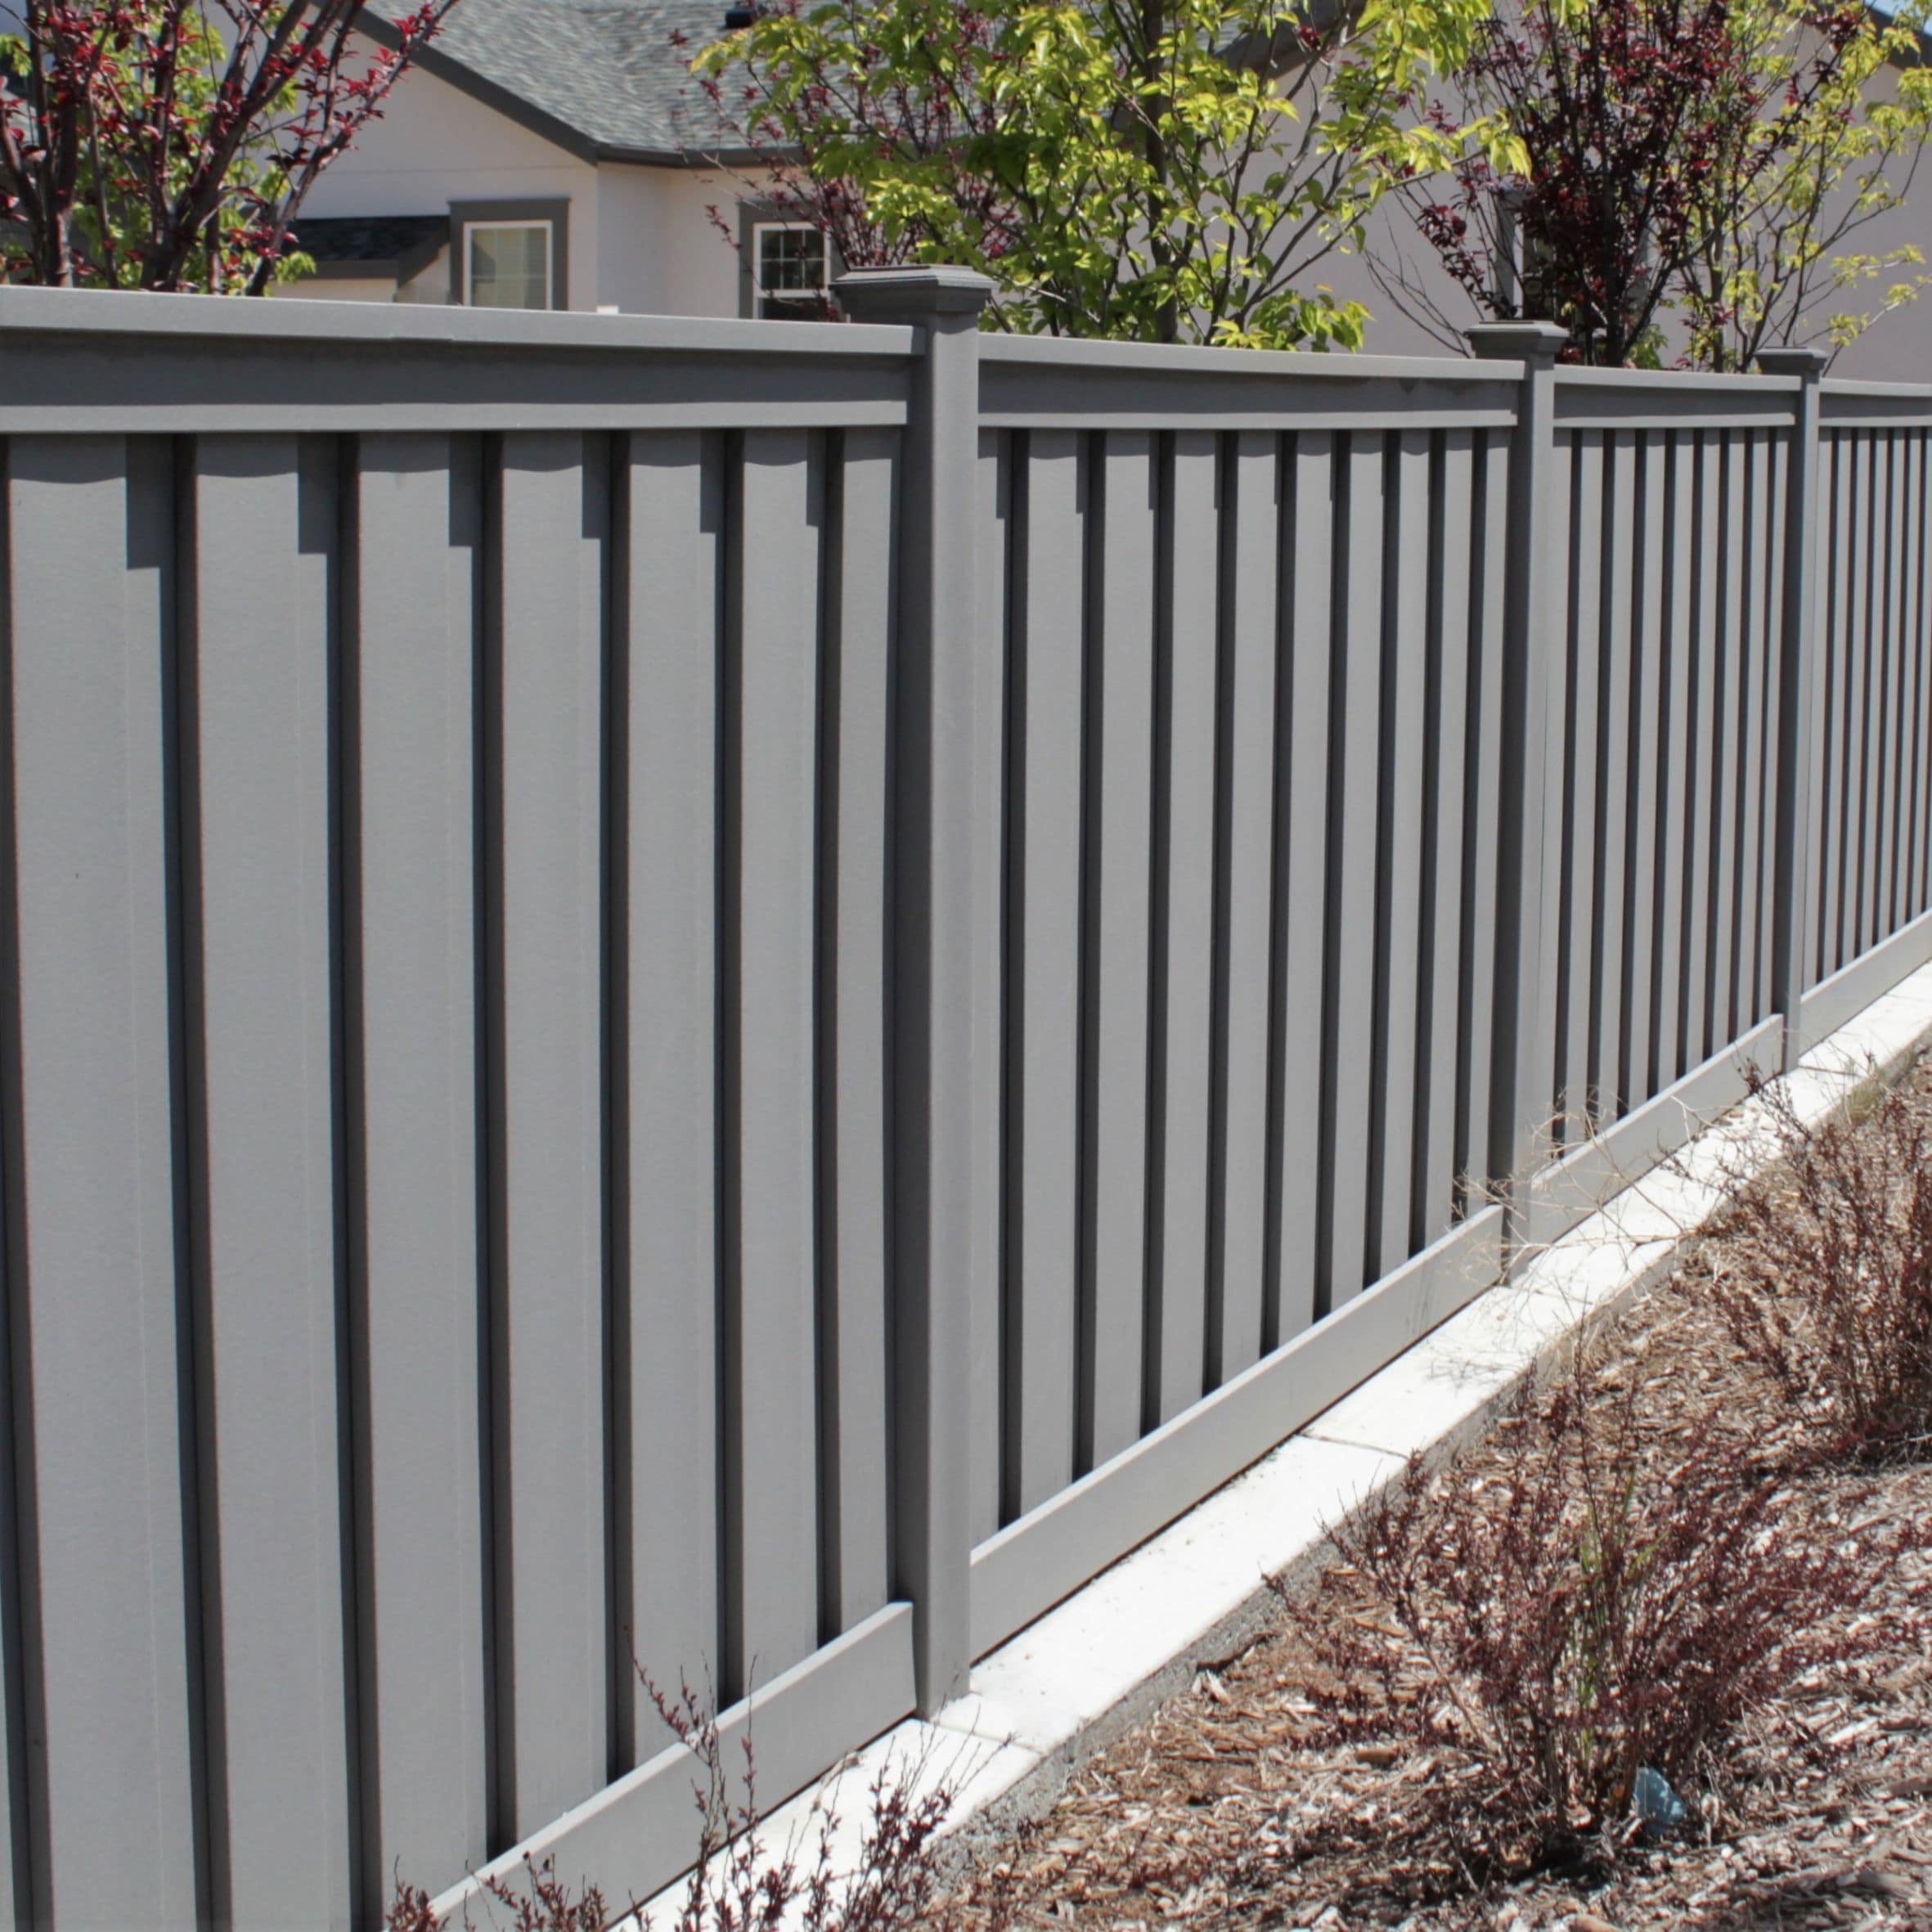 Trex Fencing 5-in x 5-in W x 9-ft H 6-Pack Winchester Grey Composite Fence with Post Cap in the Composite Fence Posts department at Lowes